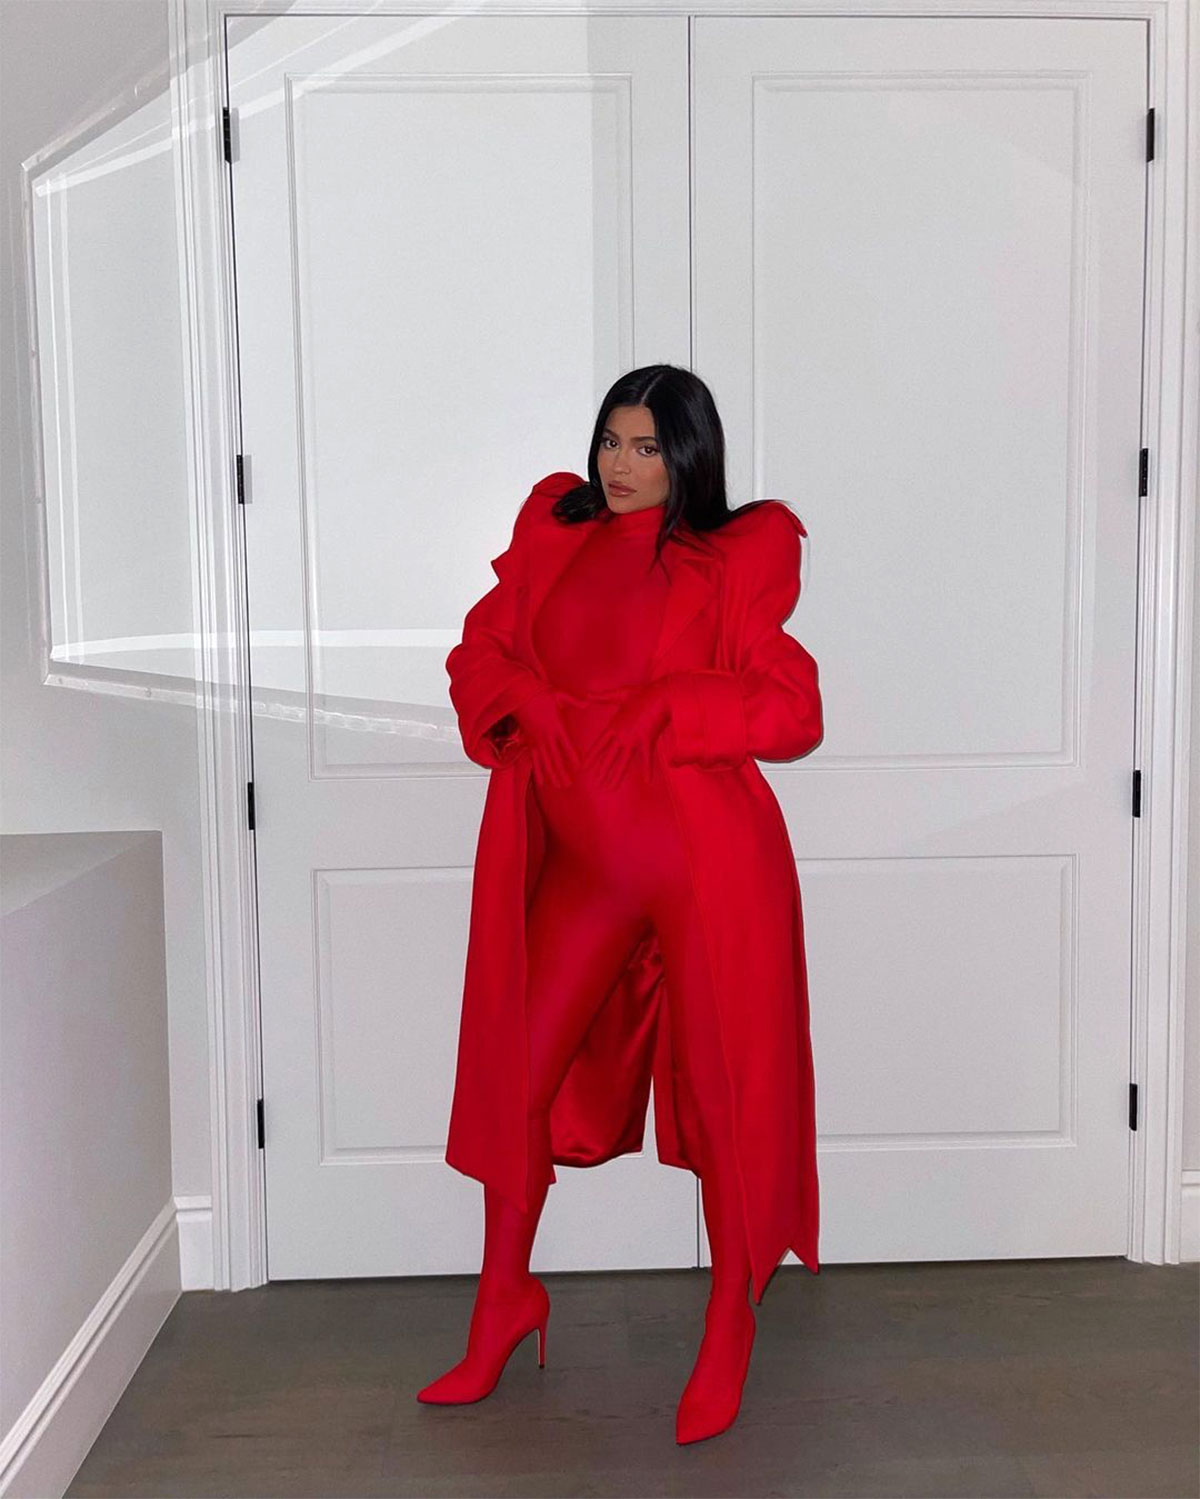 Kylie Jenner's Pre-Pregnancy Style Includes Slinky Dresses and Nikes –  Footwear News